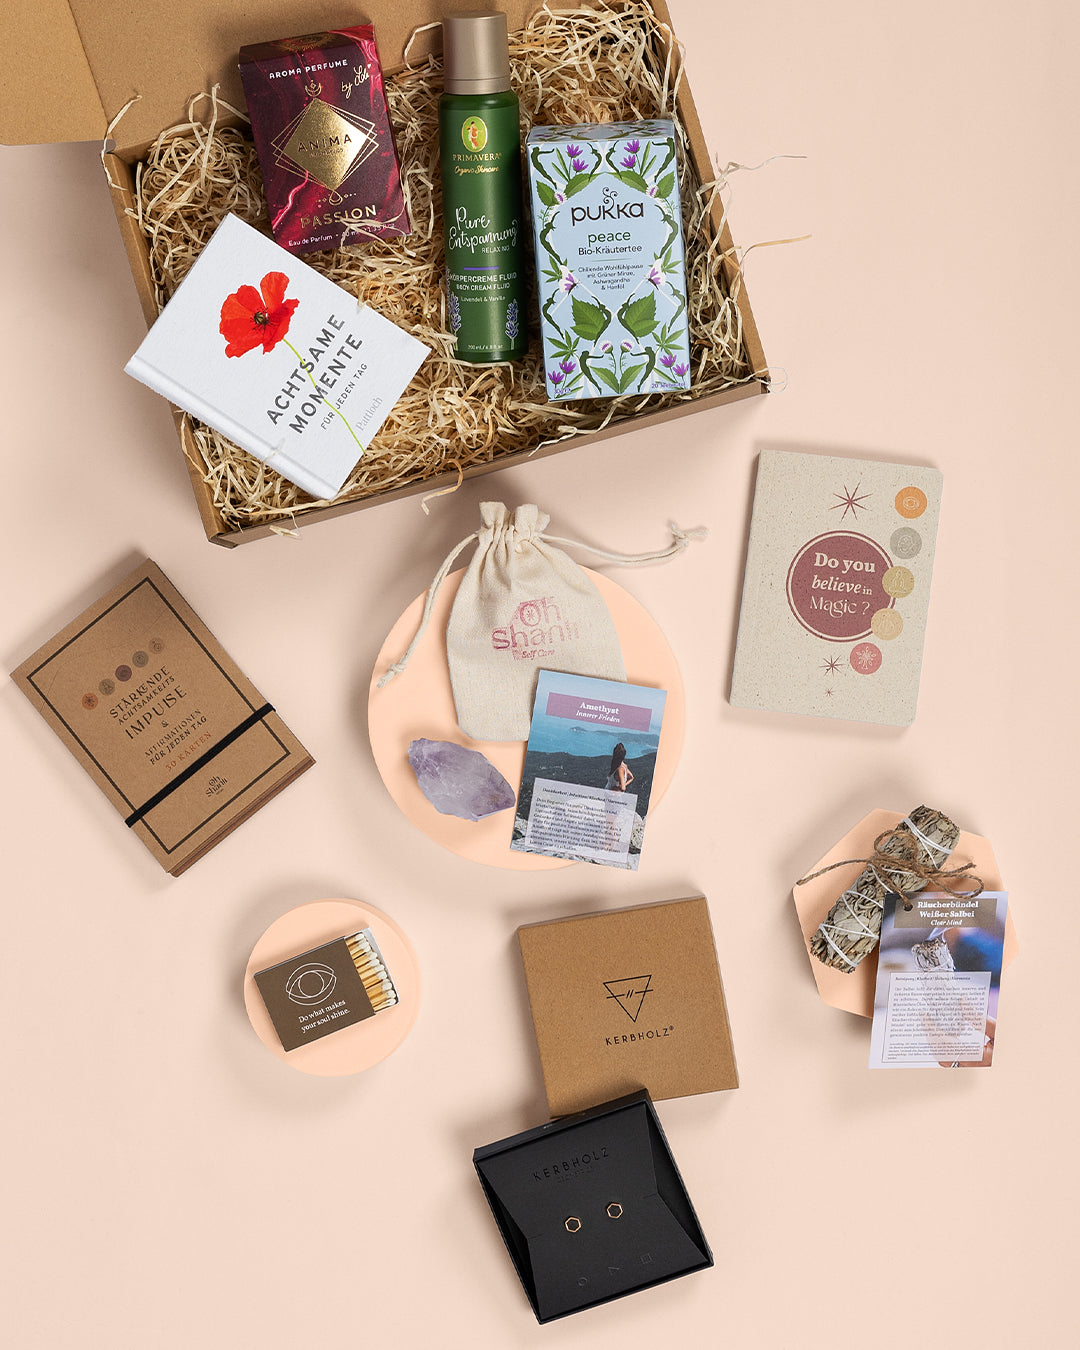 Mindful Geschenk Box „Remember your magic“